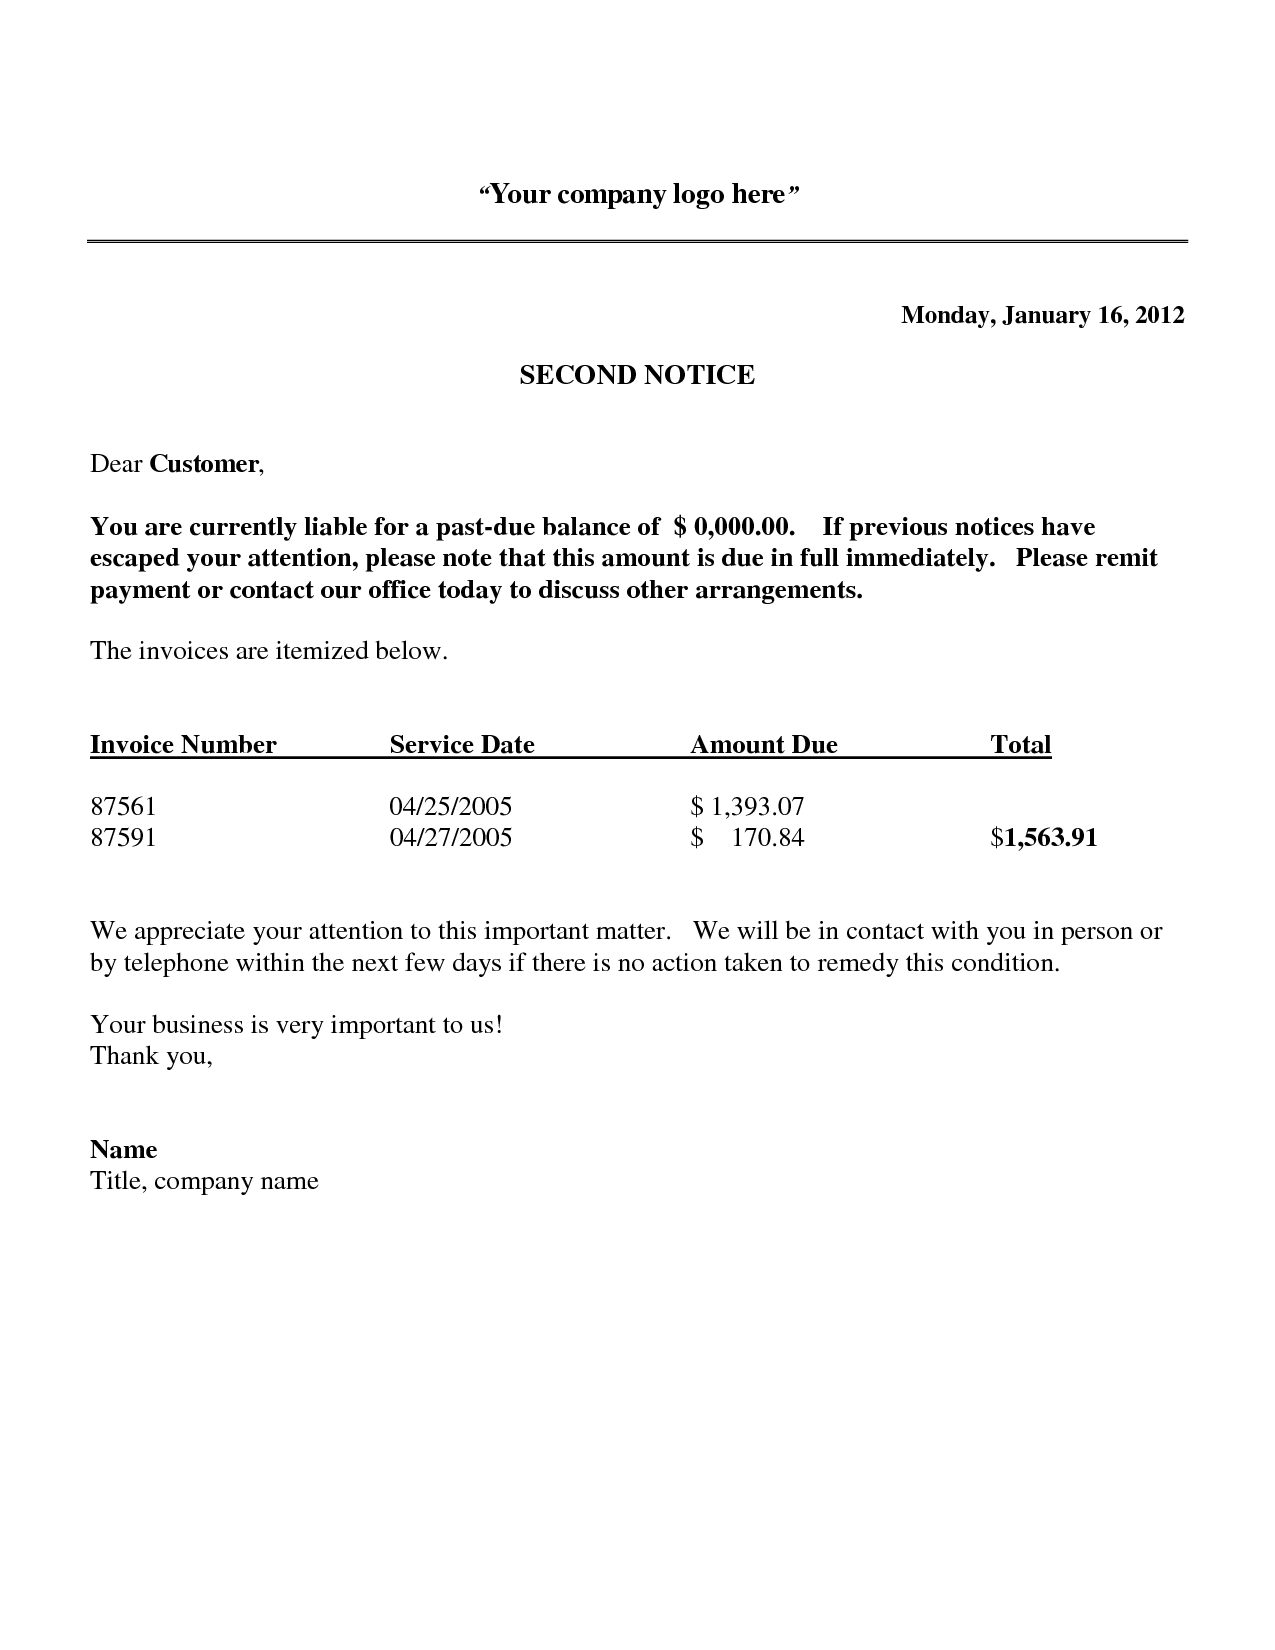 past due invoices past due invoice printable invoice template 1275 X 1650